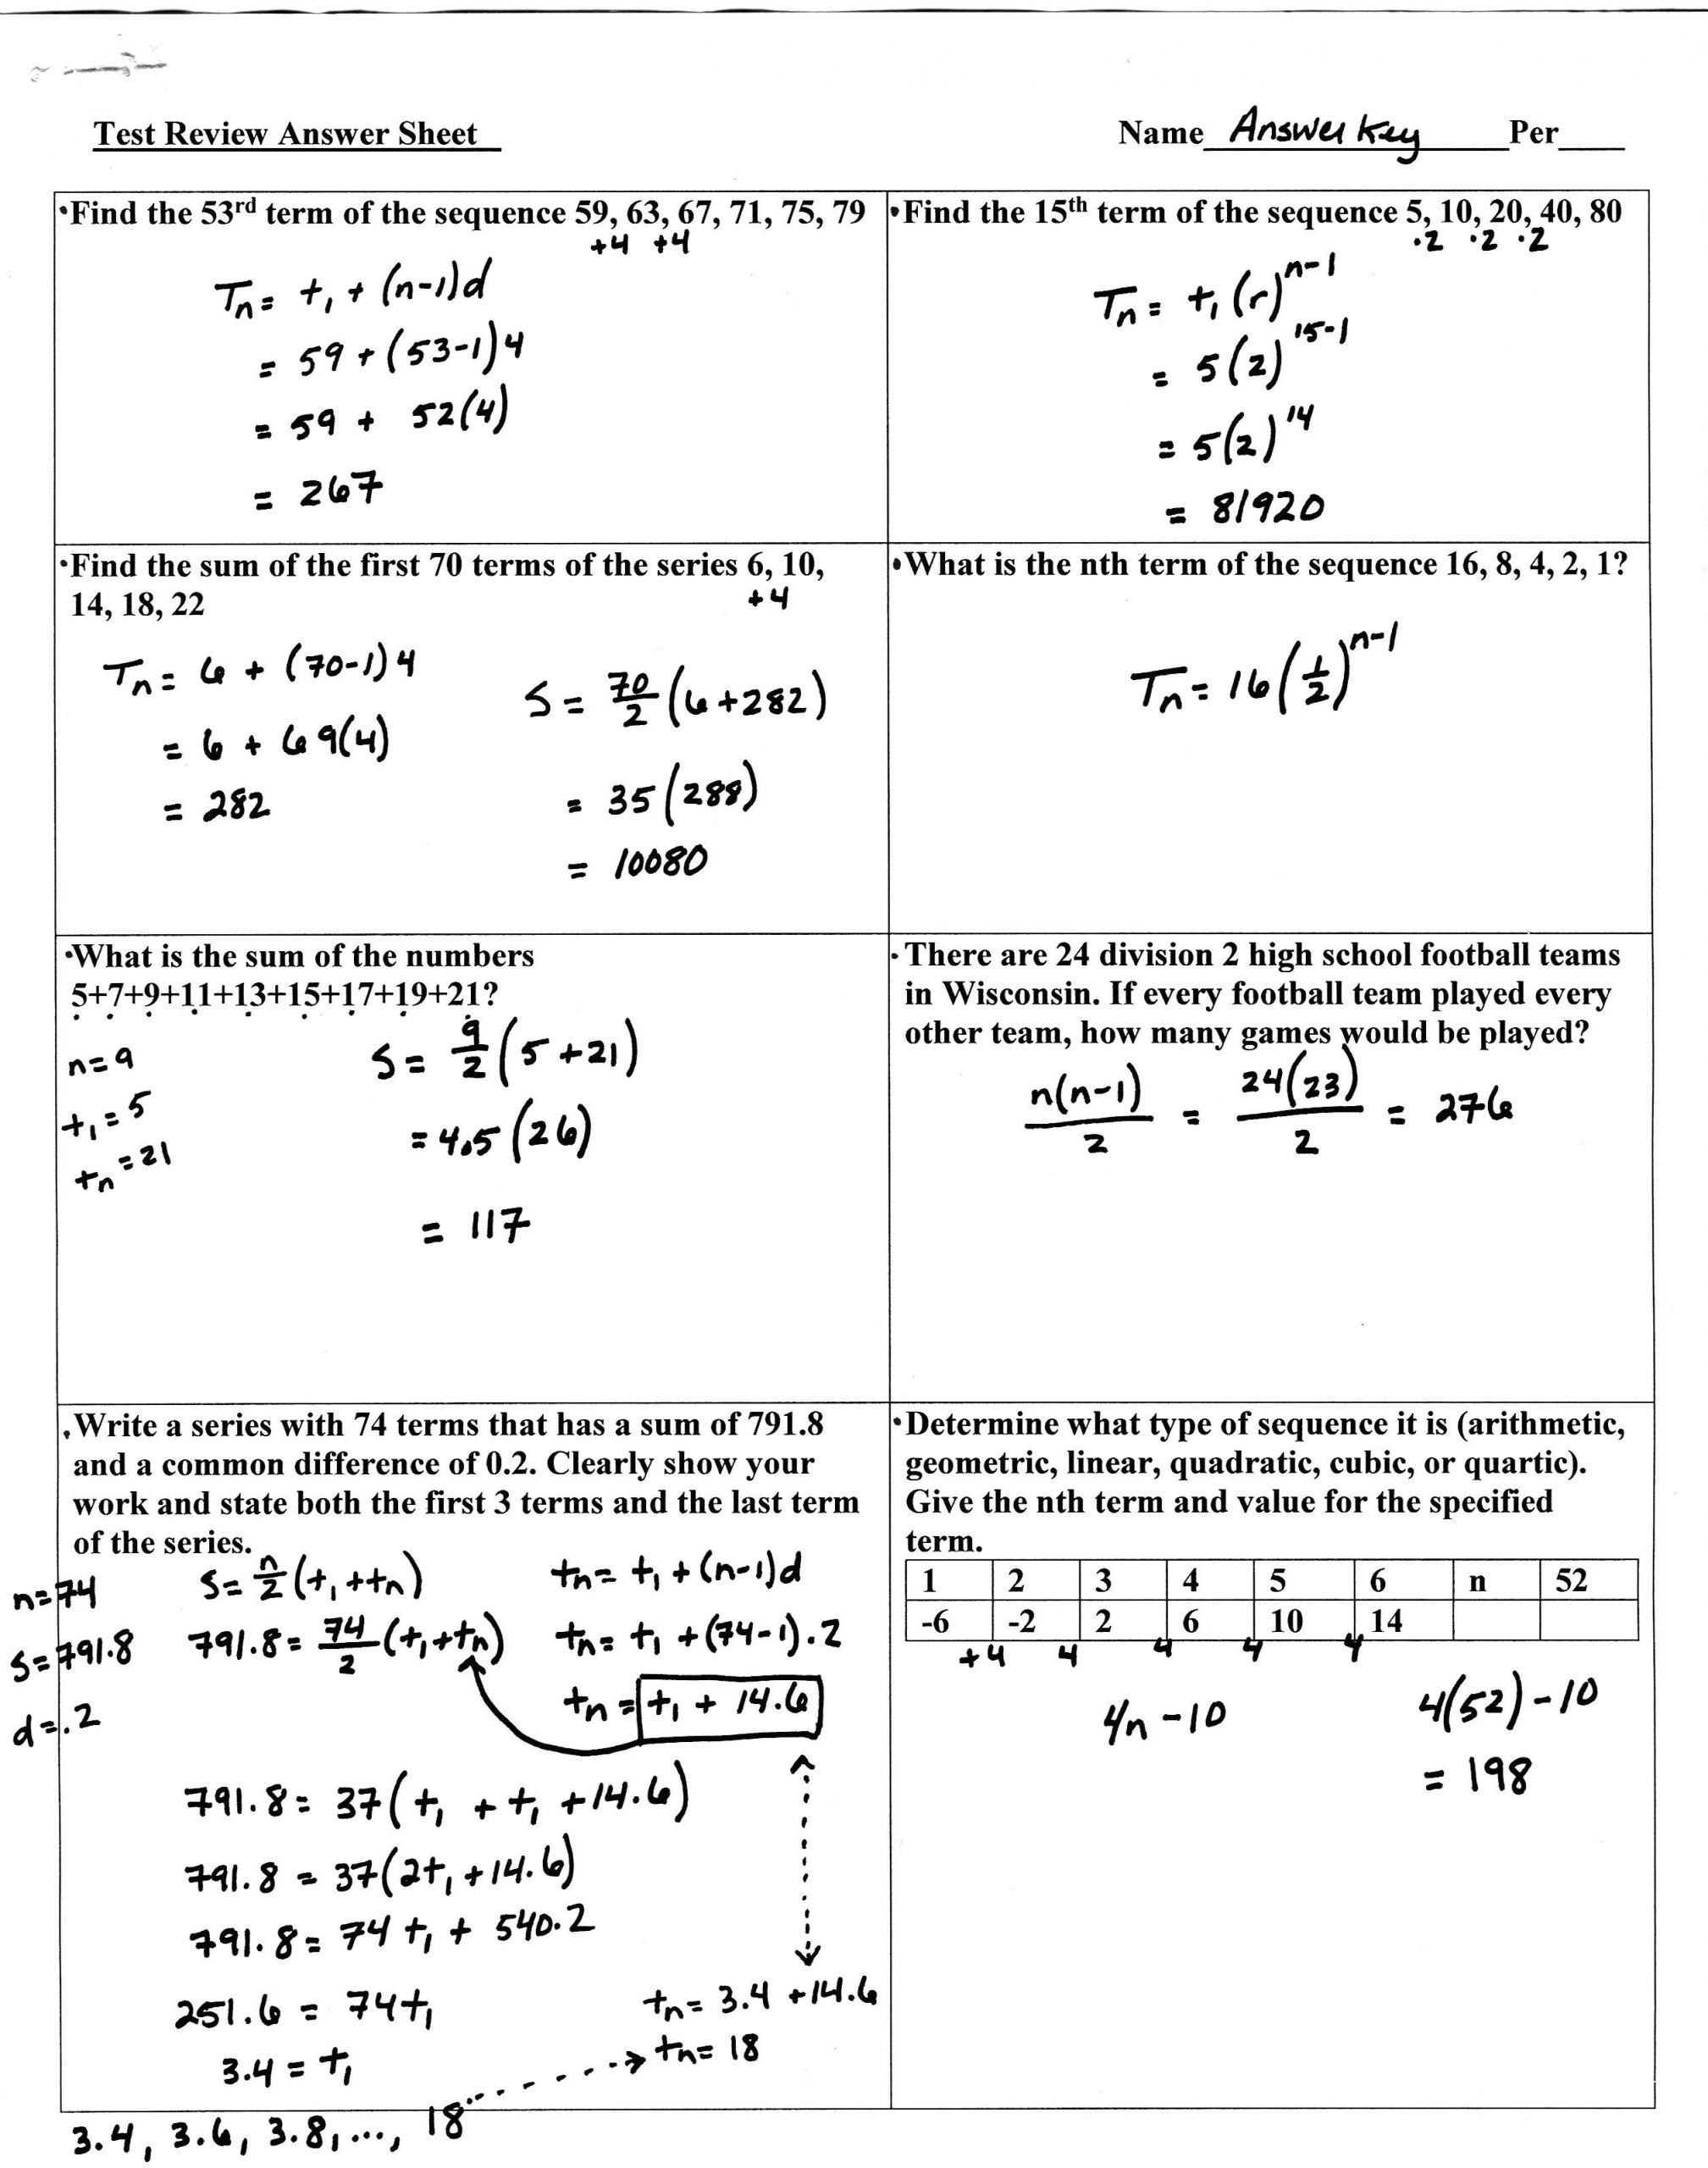 Geometric Sequences Worksheet Answers Arithmetic and Geometric Sequences Worksheet Answers Nidecmege